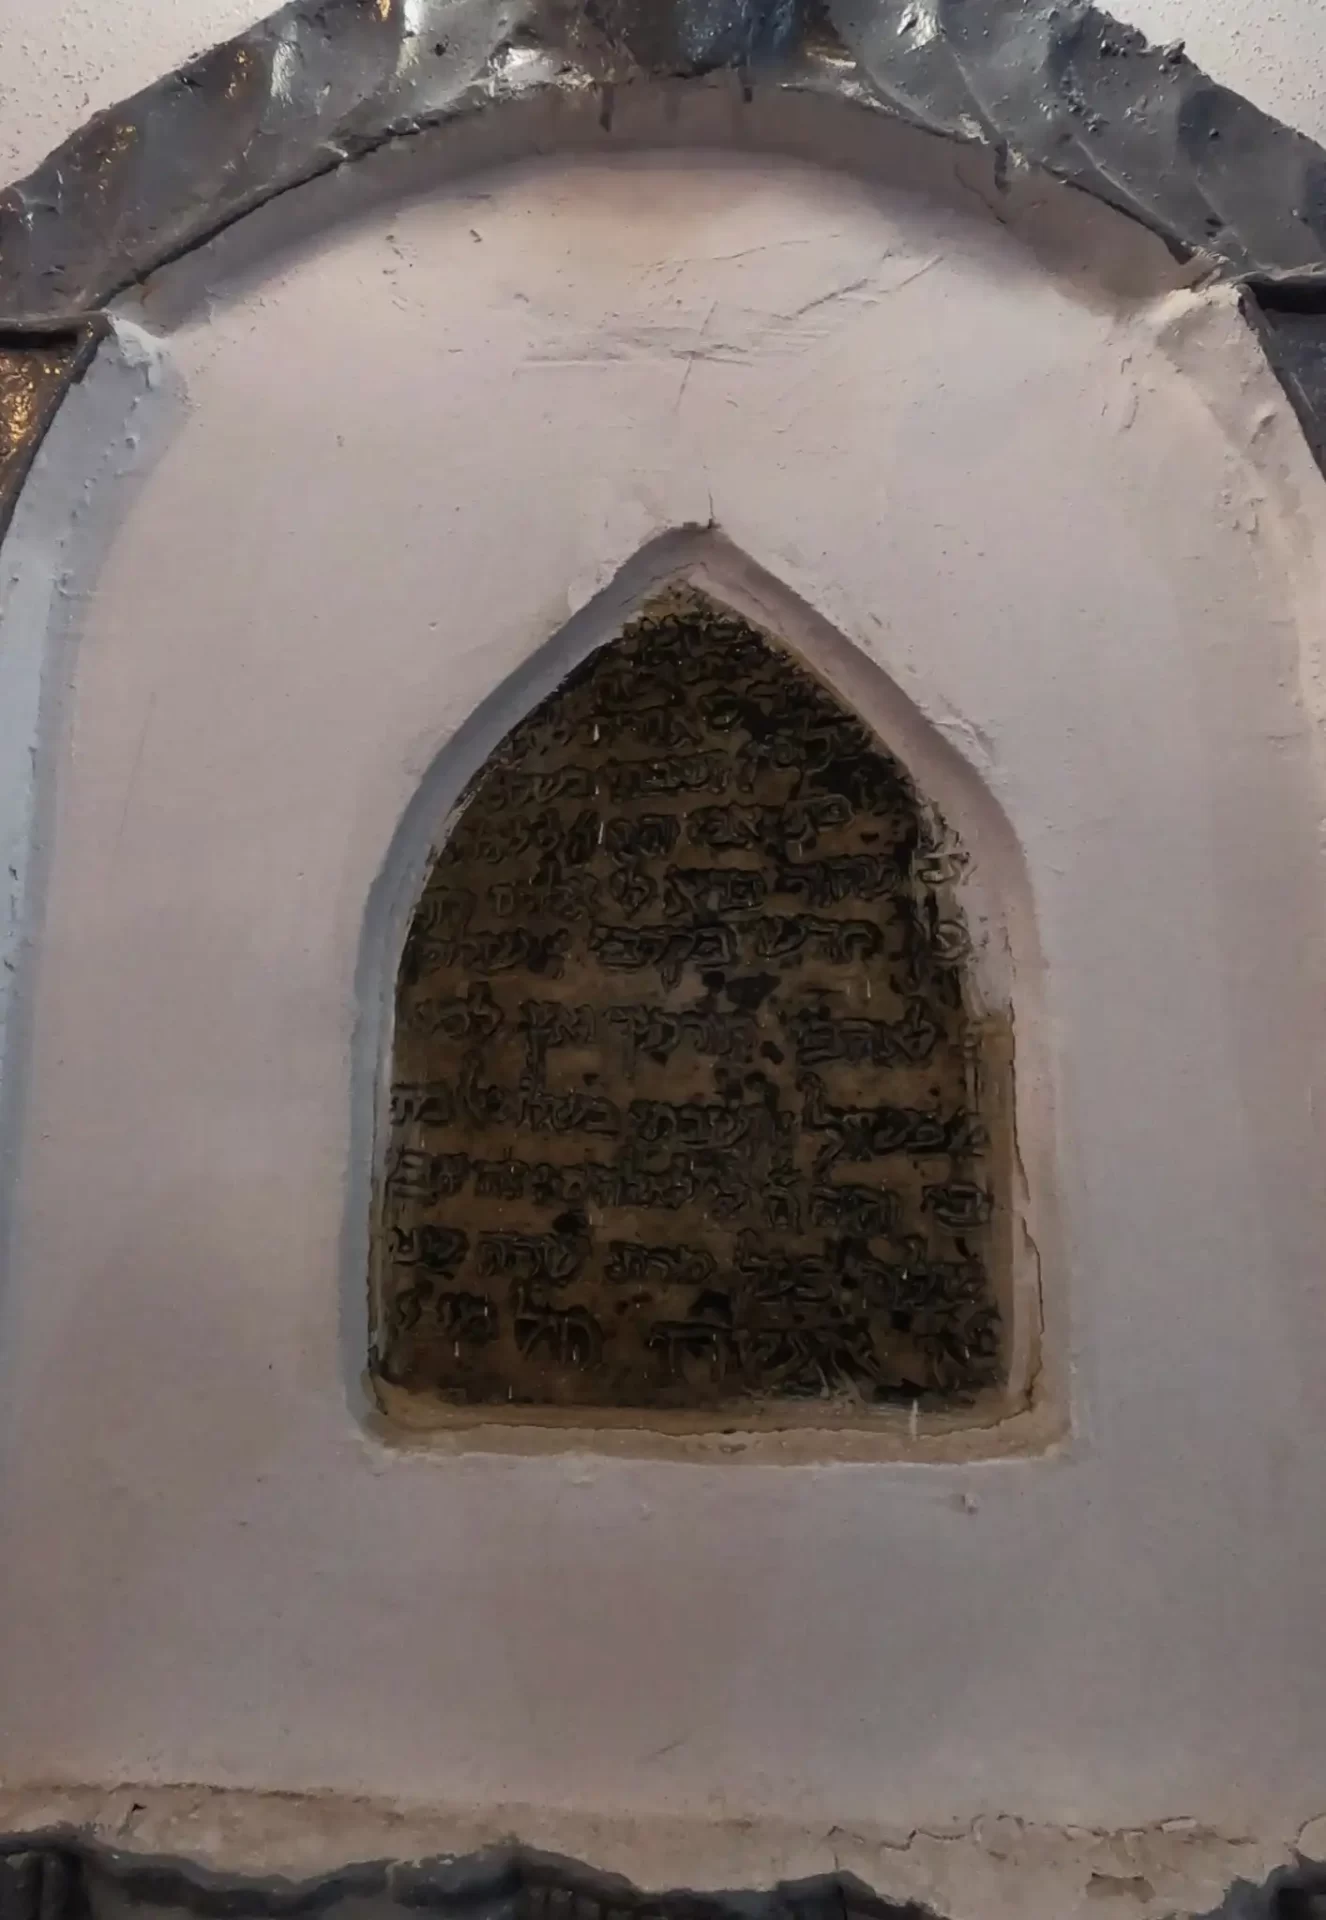 Tomb of Esther and Mordecai